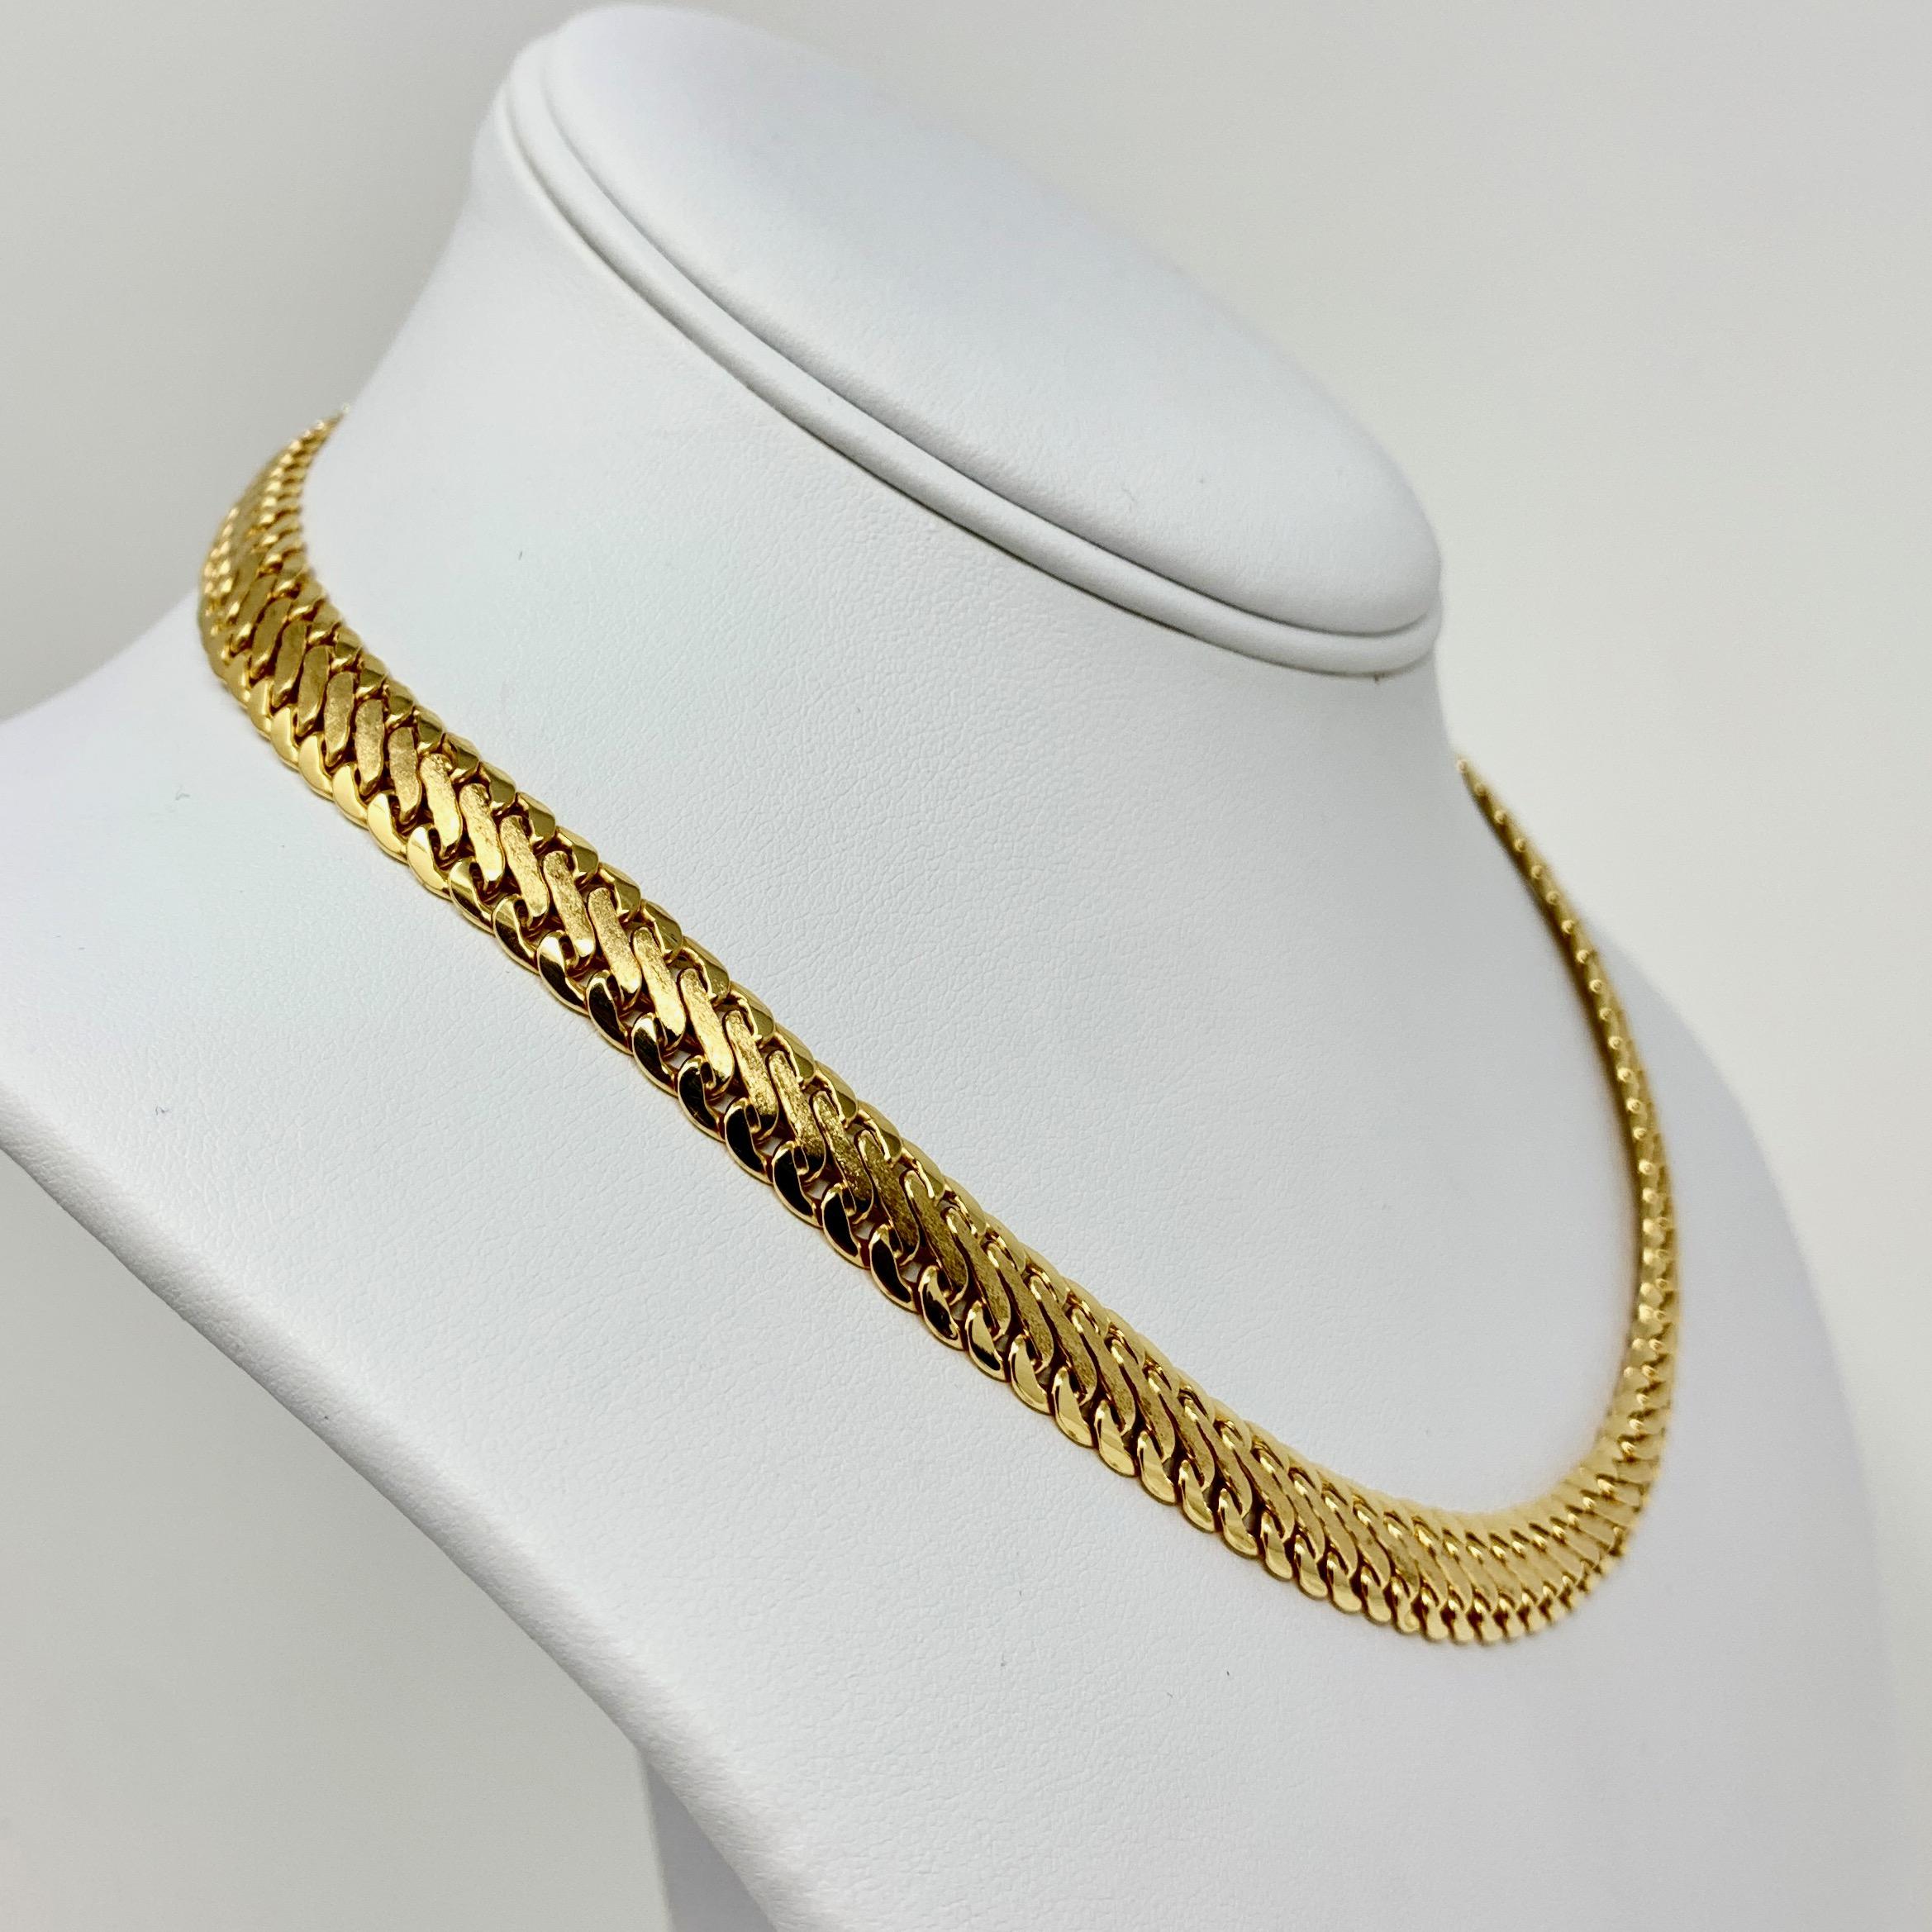 14k Yellow Gold Flat Interlocking Curb Link Chain Necklace Italy 17 Inches

Condition:  Excellent (Professionally Cleaned and Polished)
Metal:  14k Gold (Marked, and Professionally Tested)
Weight:  13.5g
Length:  17 Inches
Width:  8.5mm
Closure: 